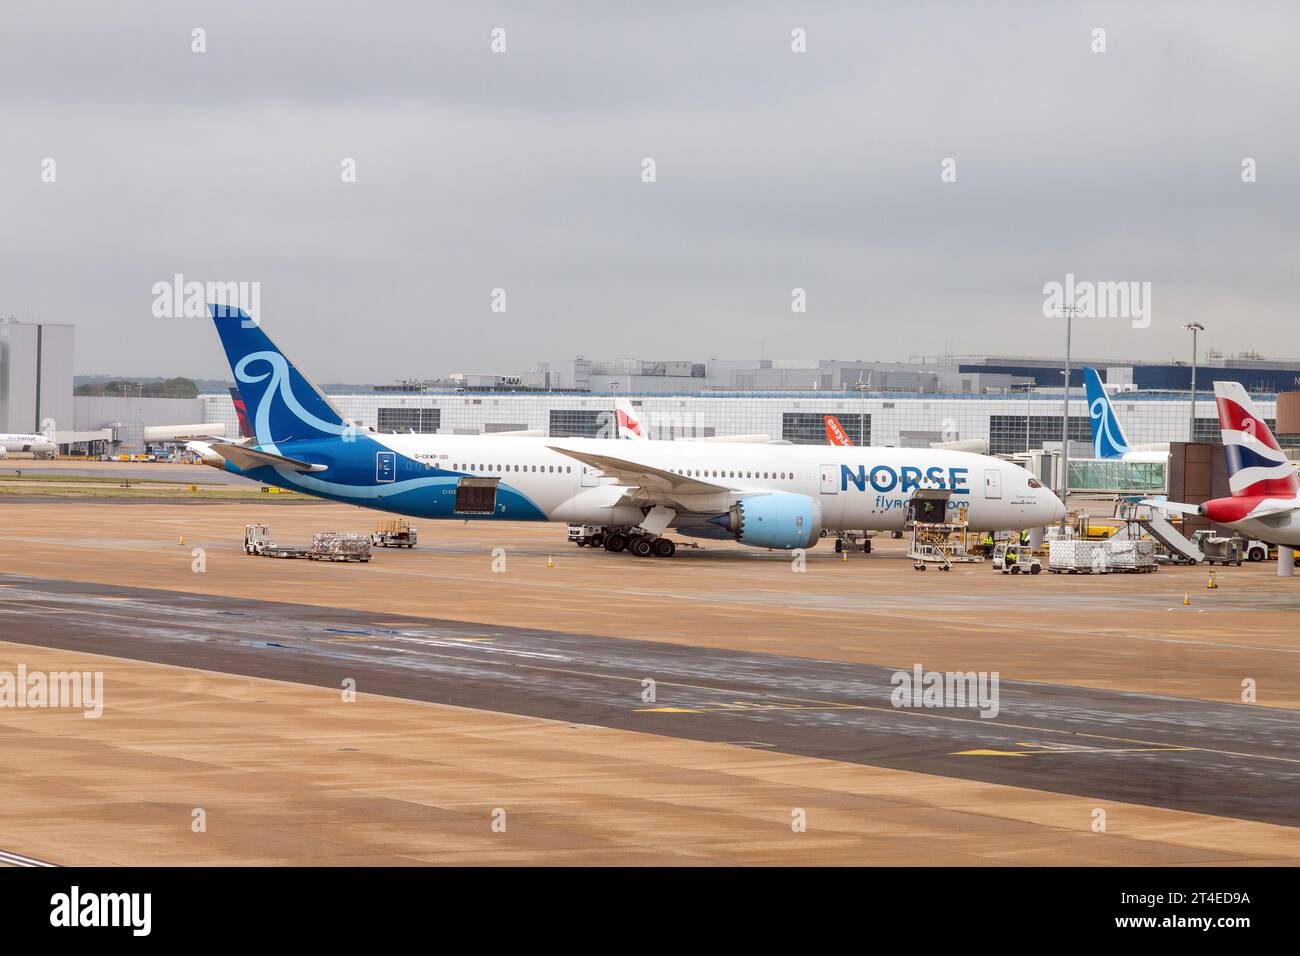 Norse Atlantic aircraft at Gatwick airport, Horley, Gatwick, West Sussex, United Kingdom. Stock Photo